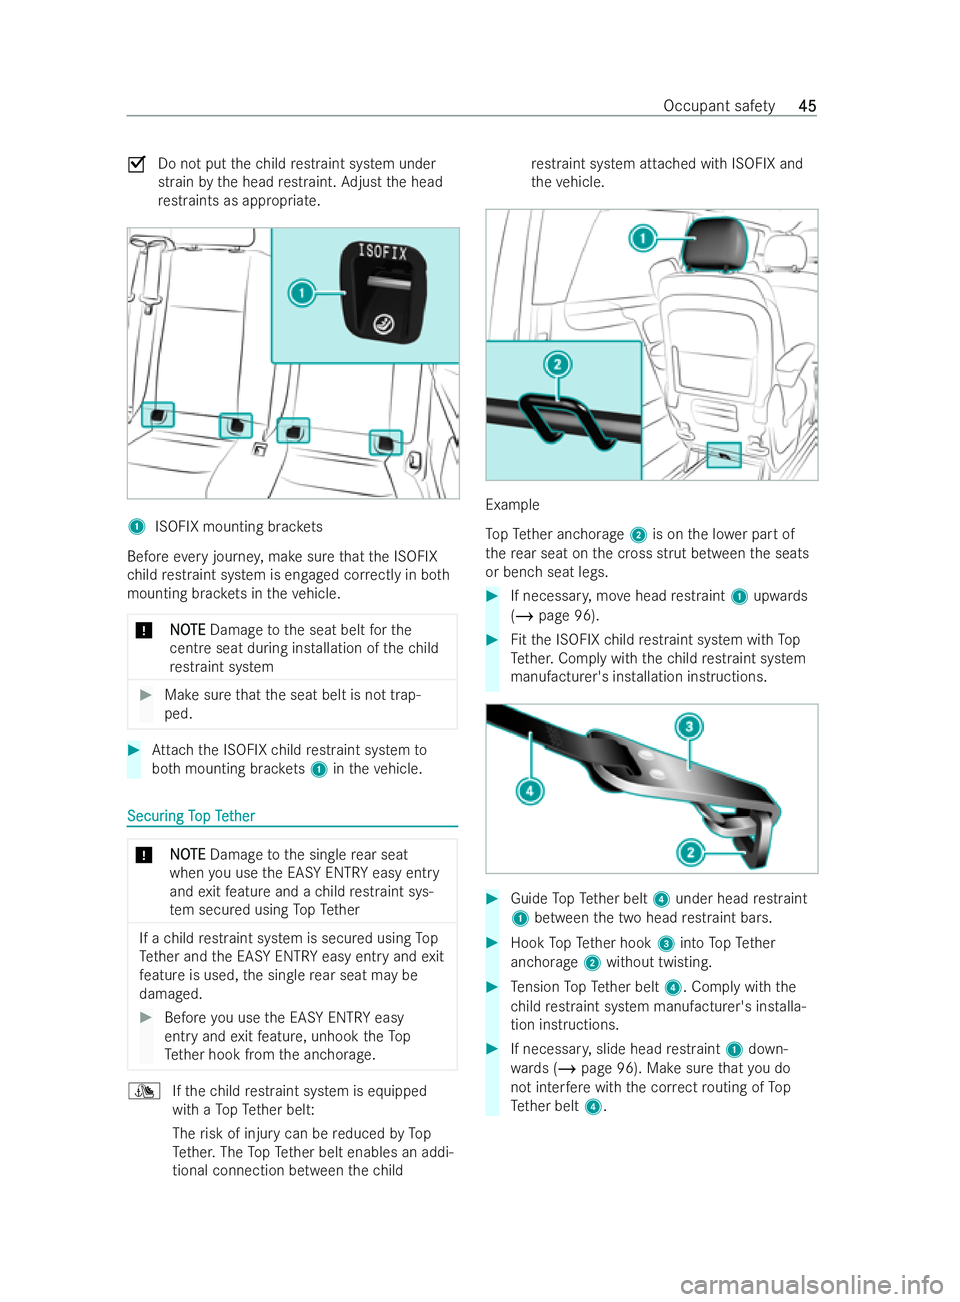 MERCEDES-BENZ V-CLASS 2021 Service Manual O
Do not put thech ild restraint system under
strain bythe head restraint. Adjust the head
re straints as appropria te.1
ISOFIX mounting brac kets
Before every journe y,make sure that the ISOFIX
ch il